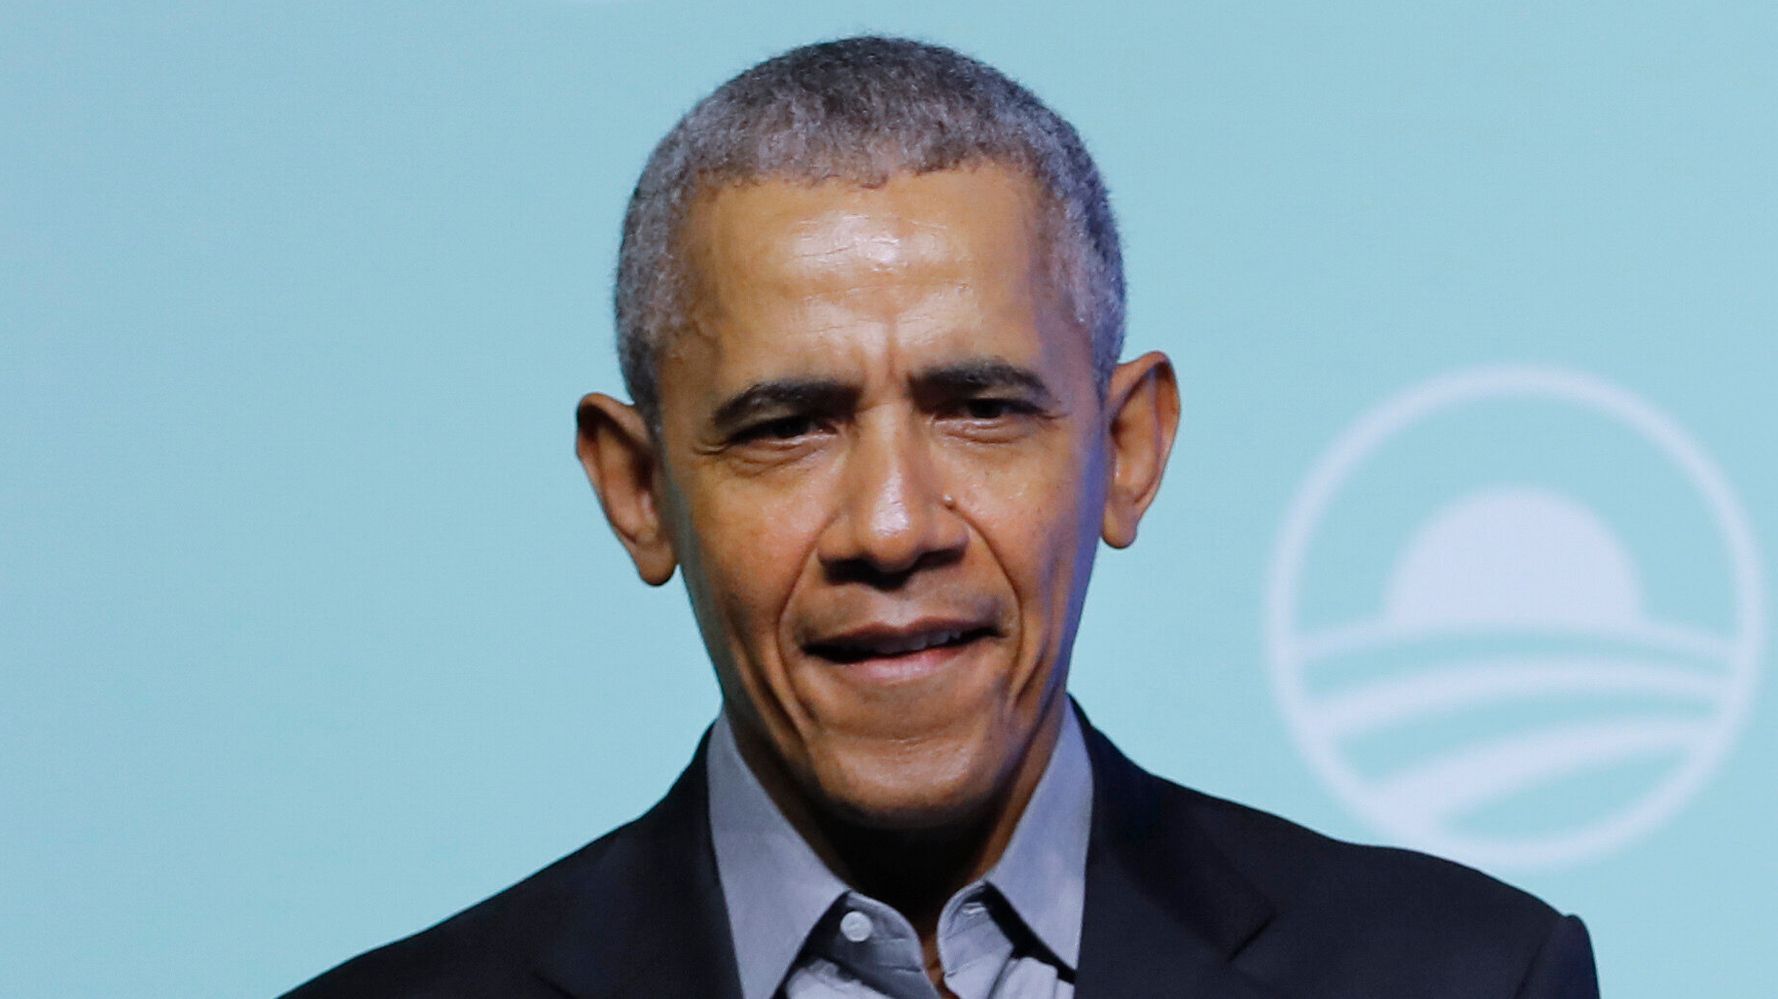 Barack Obama's Cryptic Tweet Sets Twitter Alight With Speculation ...